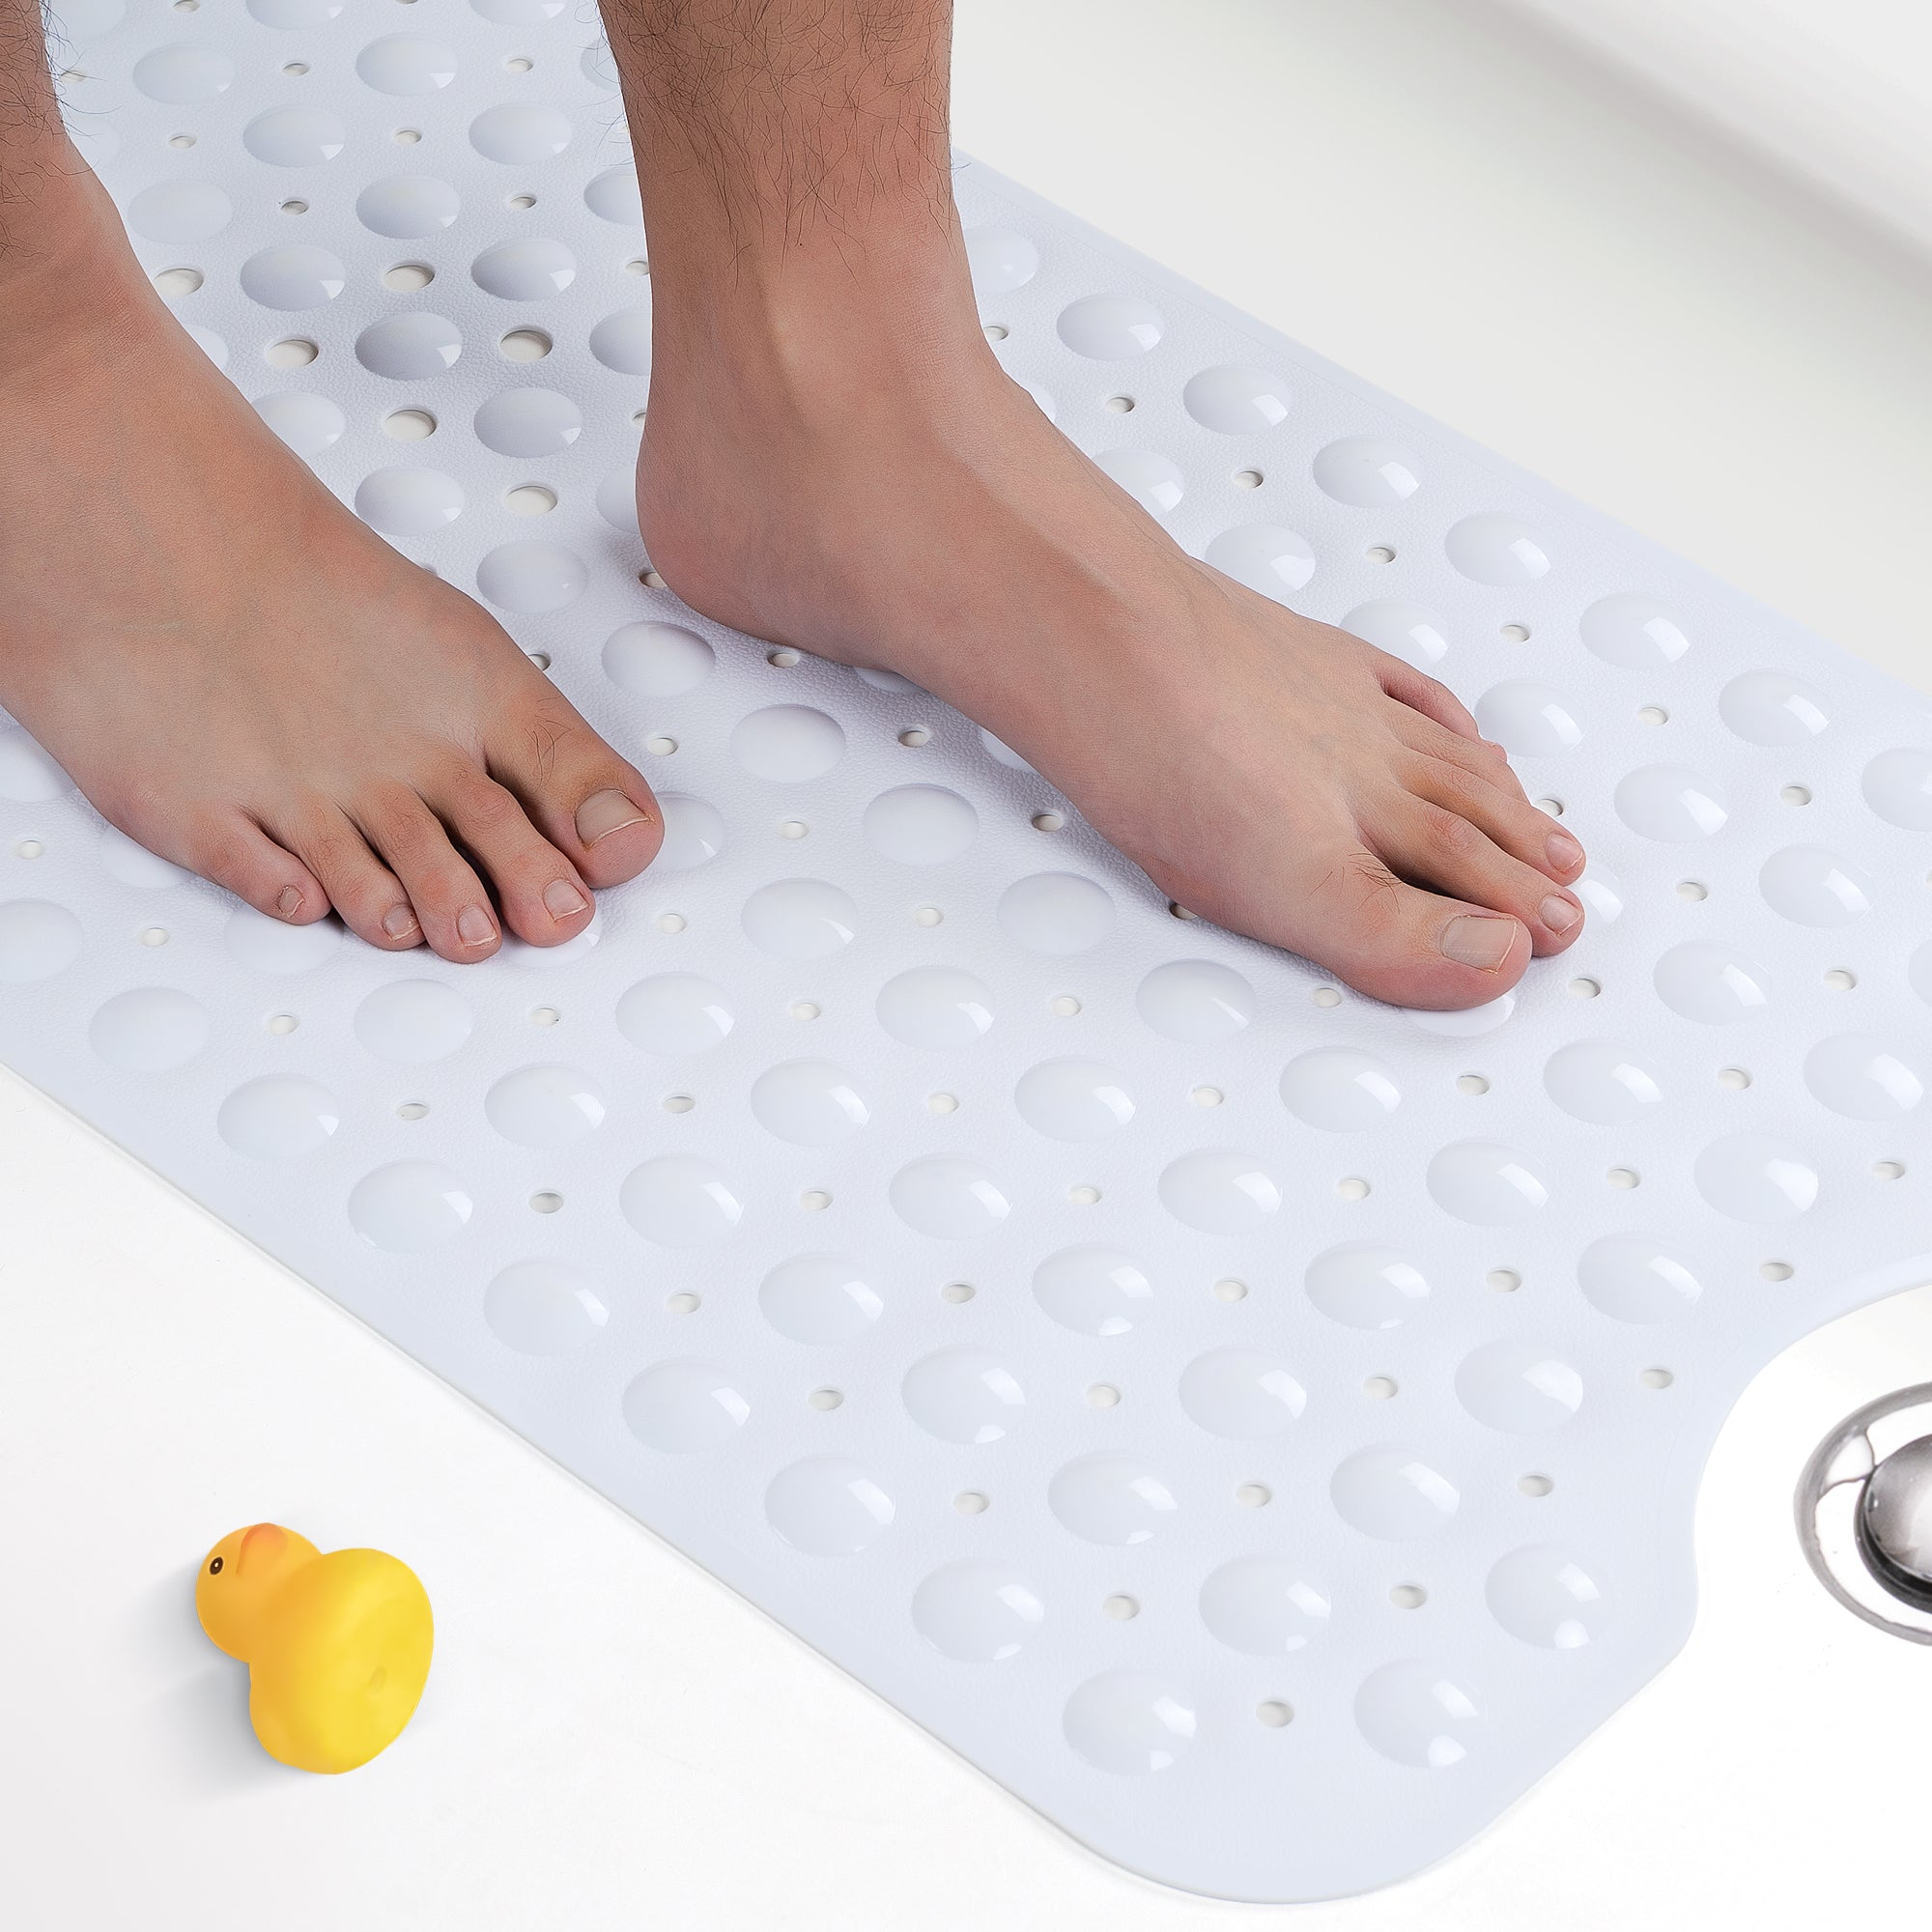 Oriental Trading Company Vicyak Bathtub Mat Non Slip 27.5 x 15.7 inch Machine Washable Shower Mats with Drain Holes and Powerful Suction Cups, Clear